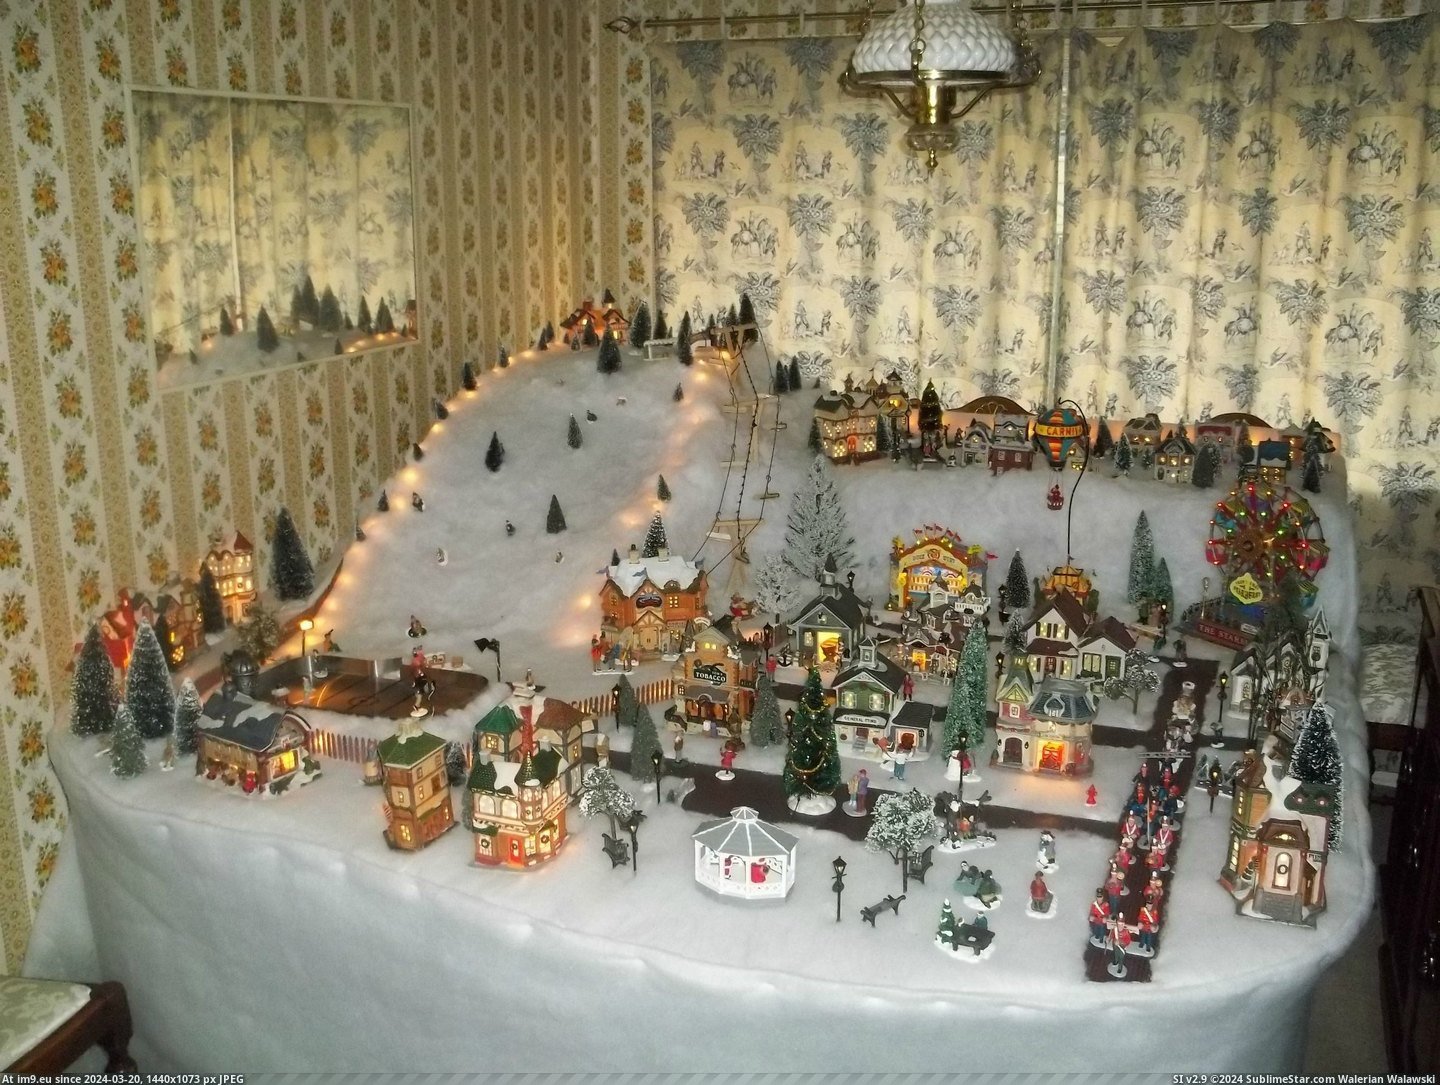 #Wife #Christmas #She #Village #Hobbies #How #Get #Wanted [Pics] The wife said she wanted a Christmas village, she should know how serious I get with hobbies. Pic. (Image of album My r/PICS favs))